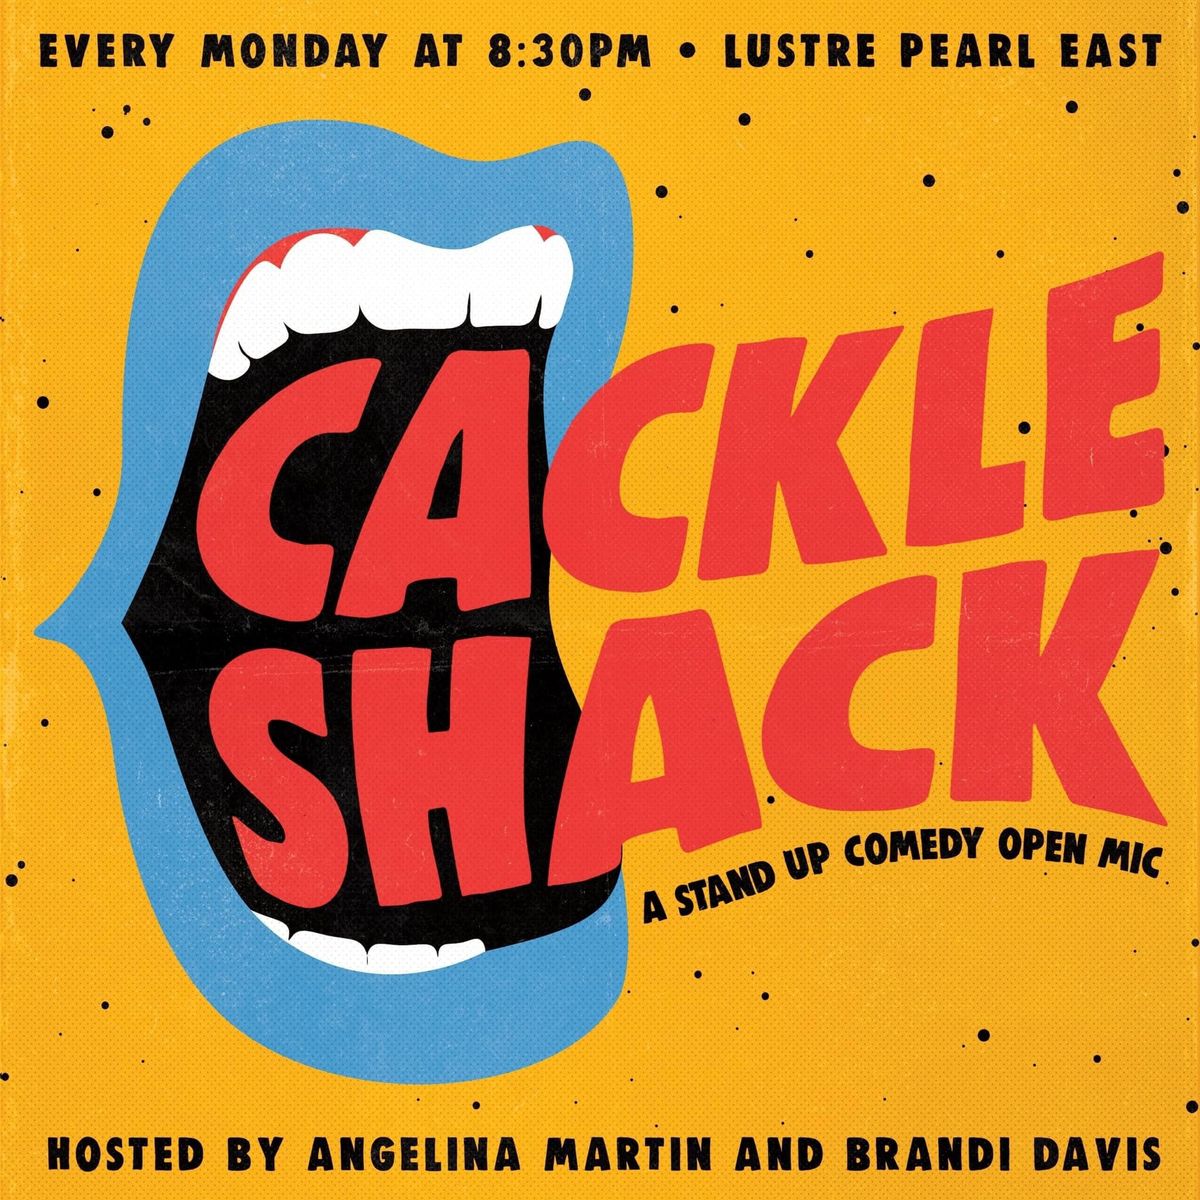 Cackle Shack Comedy